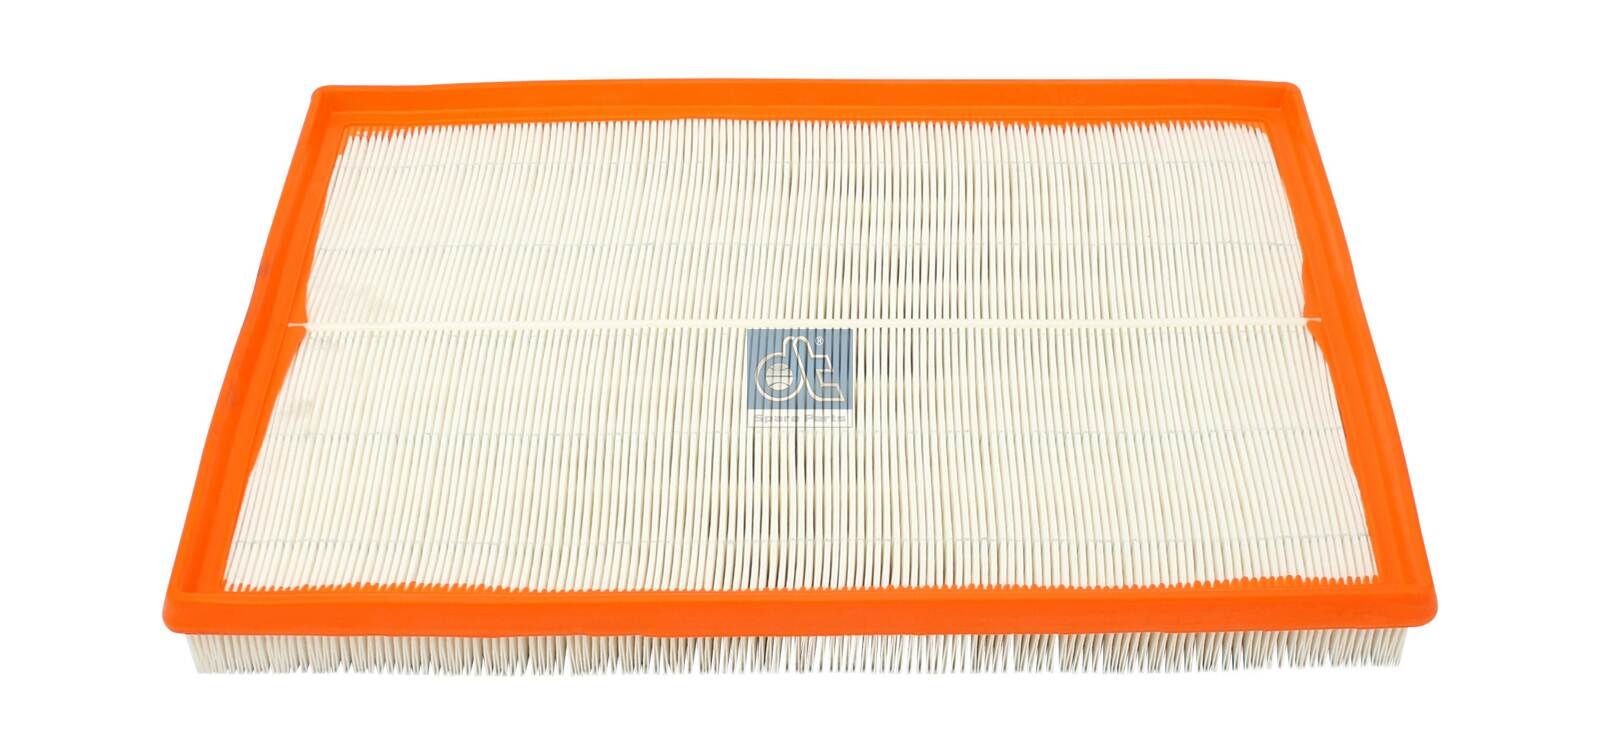 LX 2080 DT Spare Parts 6.25052 Air filter 5010 317 658